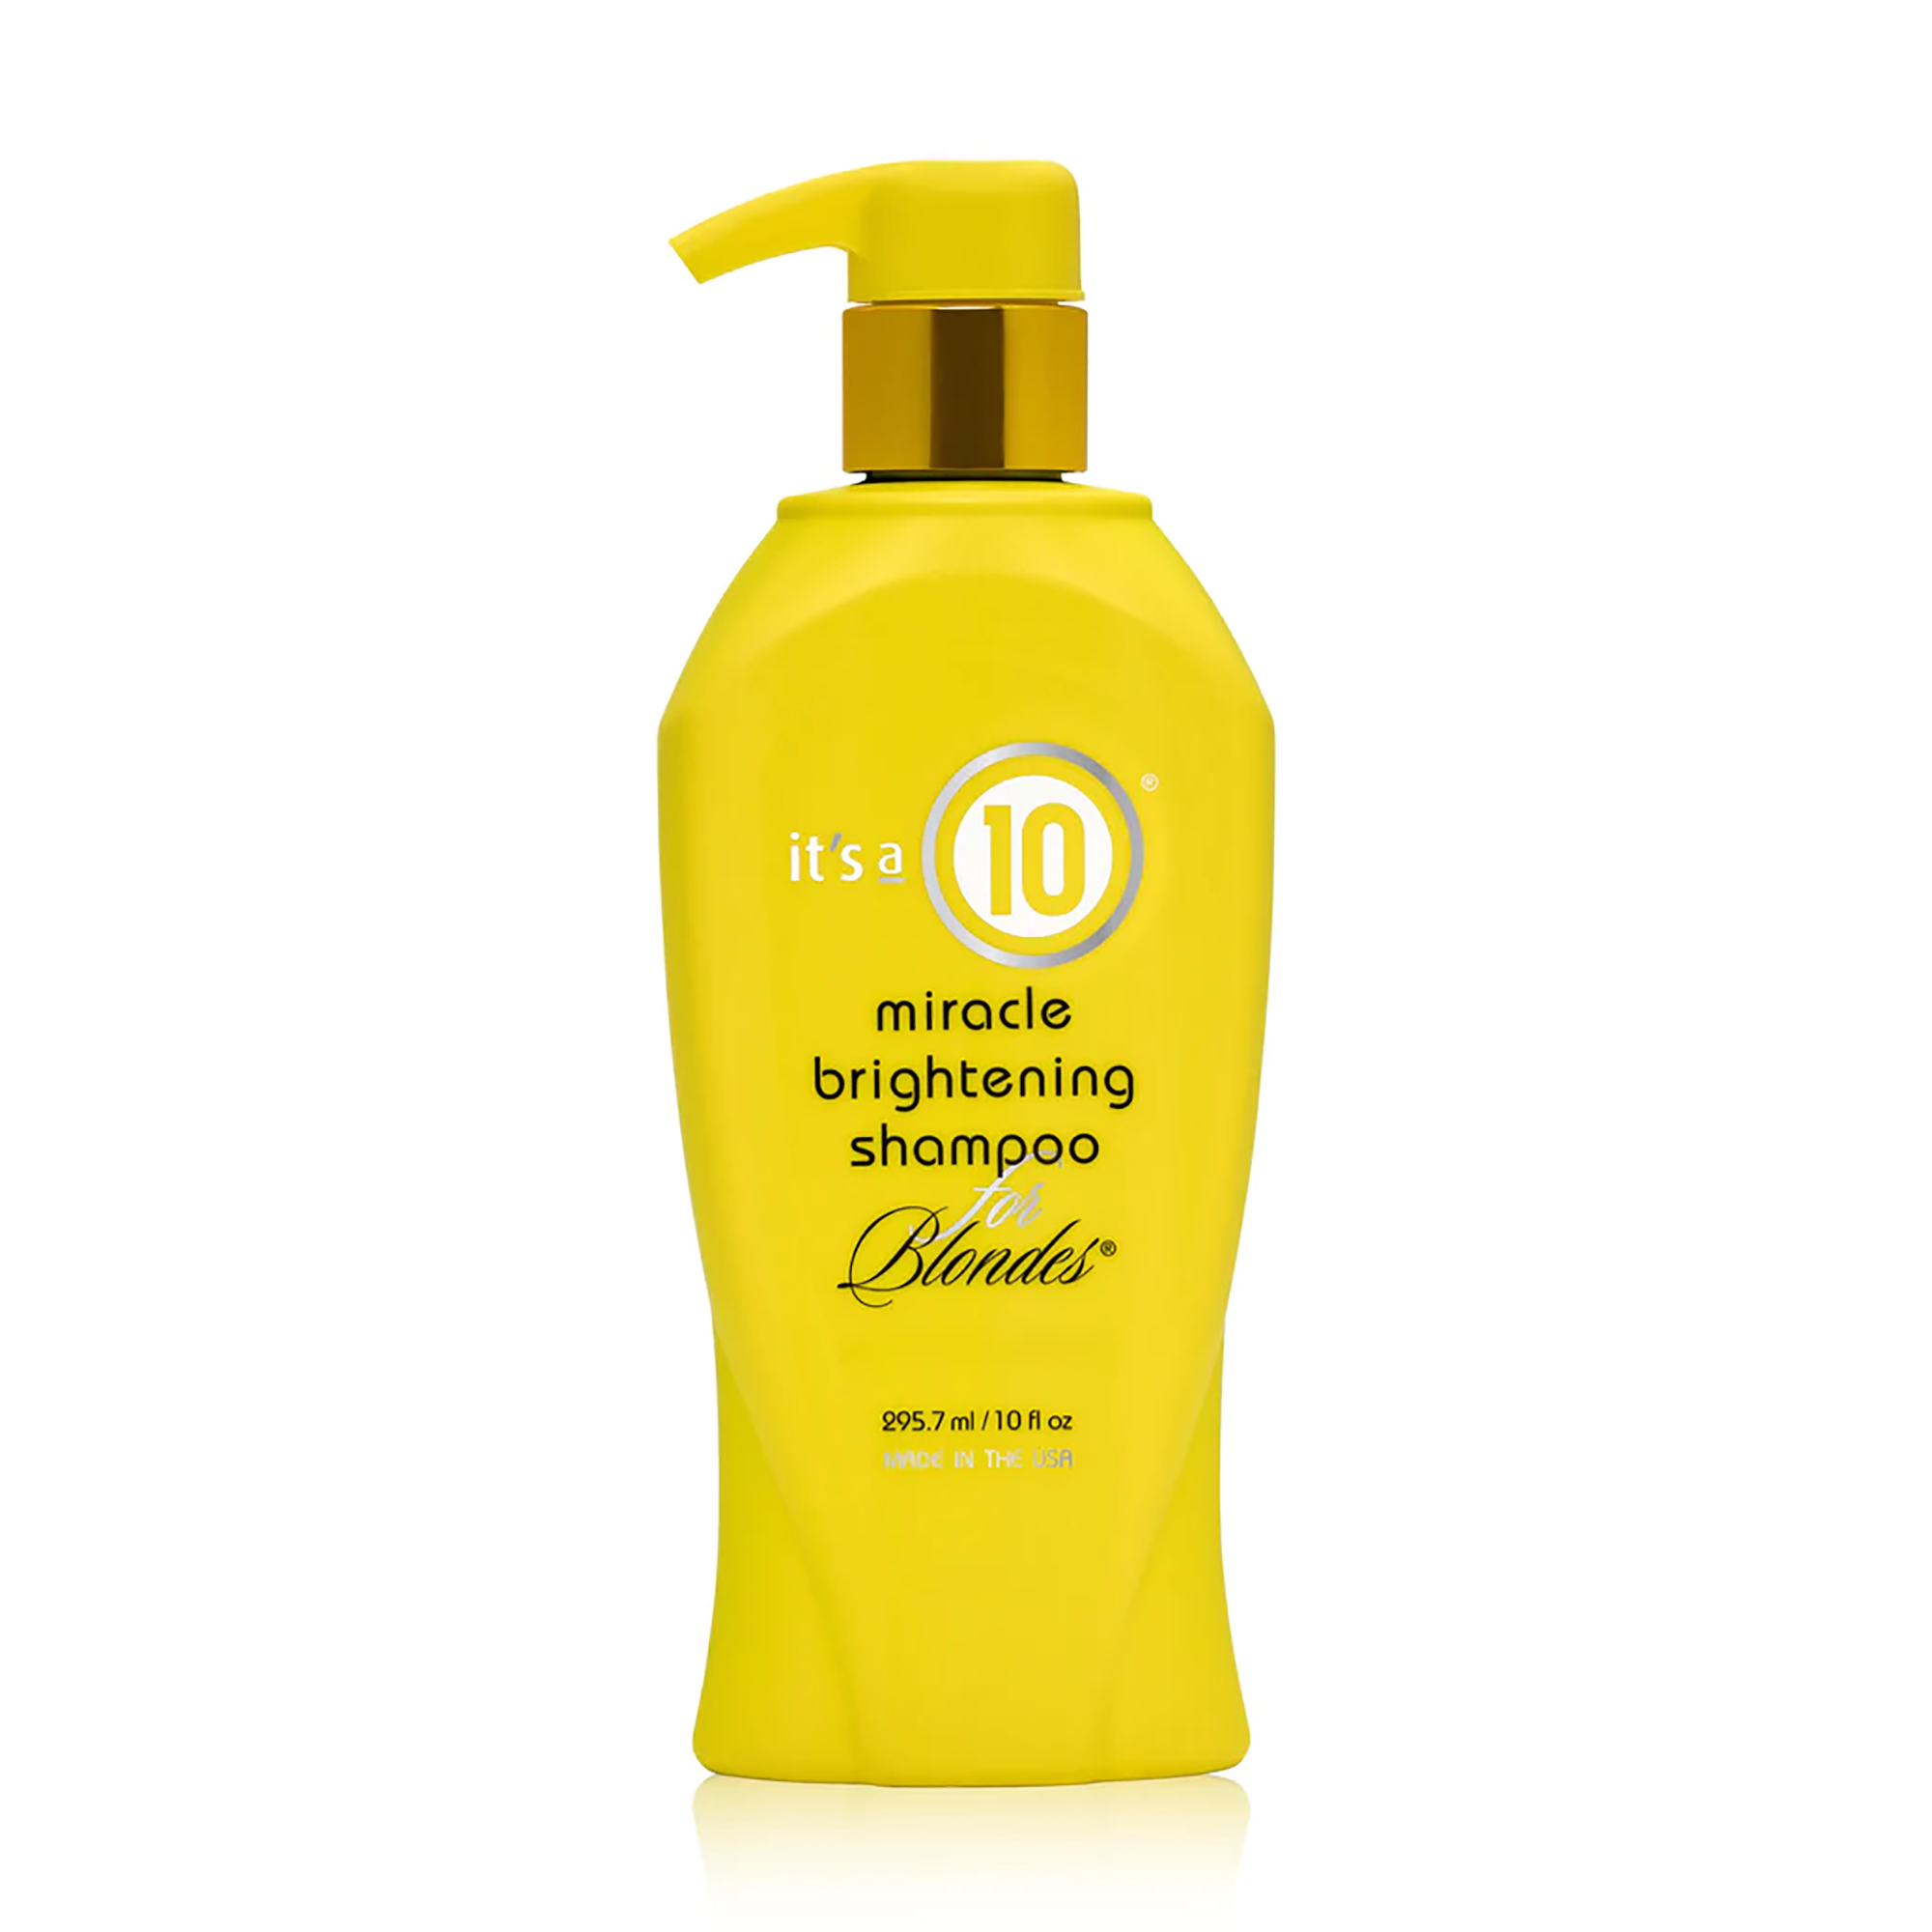 It’s a 10 Miracle Brightening Blonde Shampoo / 10.OZ